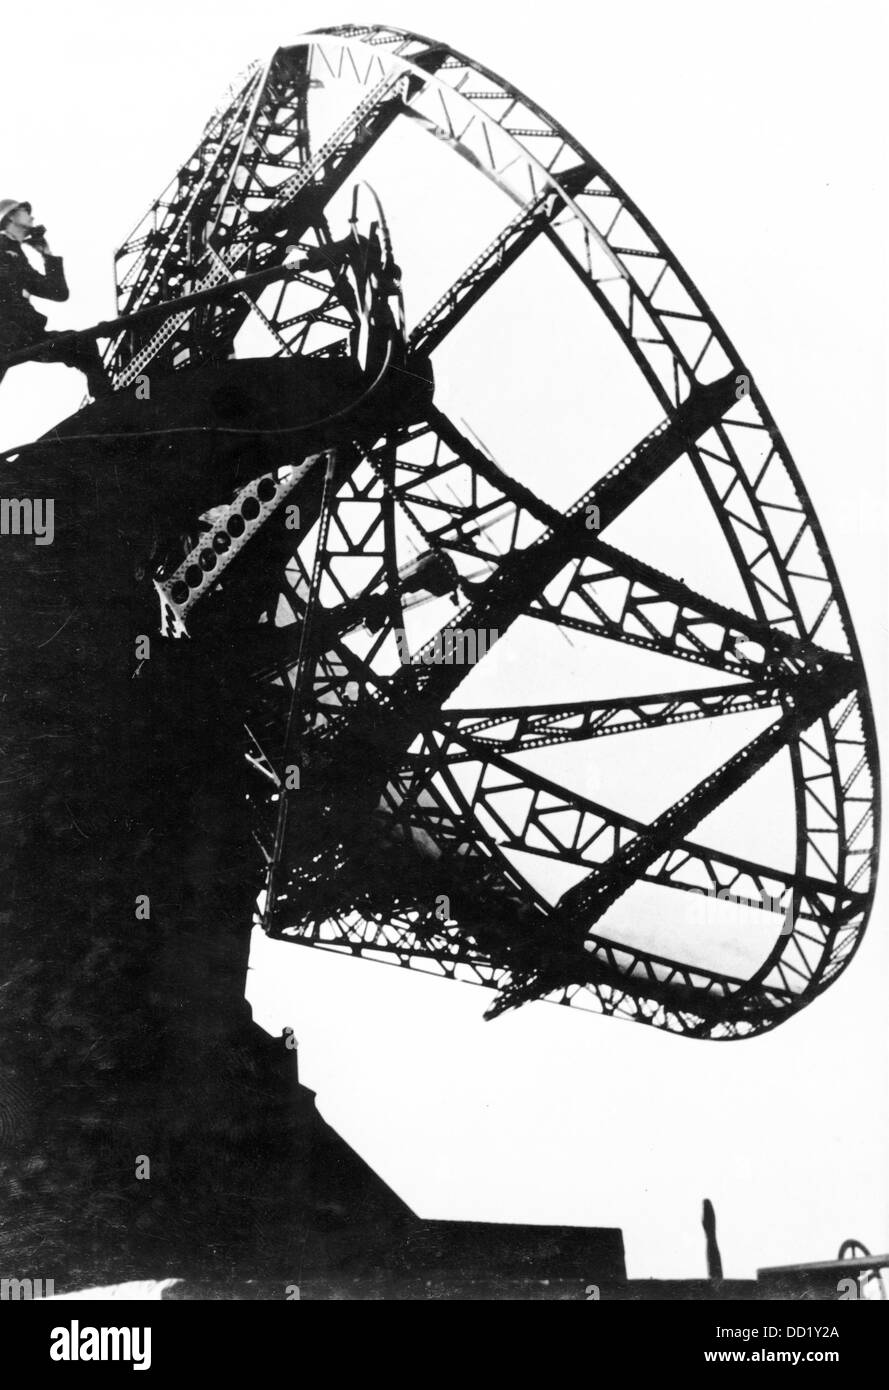 A 'Würzburg' radar in use for antiaircraft defense in May 1944. Place unknown. The Nazi Propaganda! on the back of the picture is dated 16 May 1944: 'Attention! We report on the situation in the air! The warning from the ether. The goliath of the air space. It transmits invisible magnetic pulses into the space that detect the incoming enemy a long time before he reaches the target and do not release him again. This goliath transmits with speed of sound the direction, altitude, and flight path of the enemy machines. The terrorist aircraft does not find any shelter in front of this magnetic eye  Stock Photo